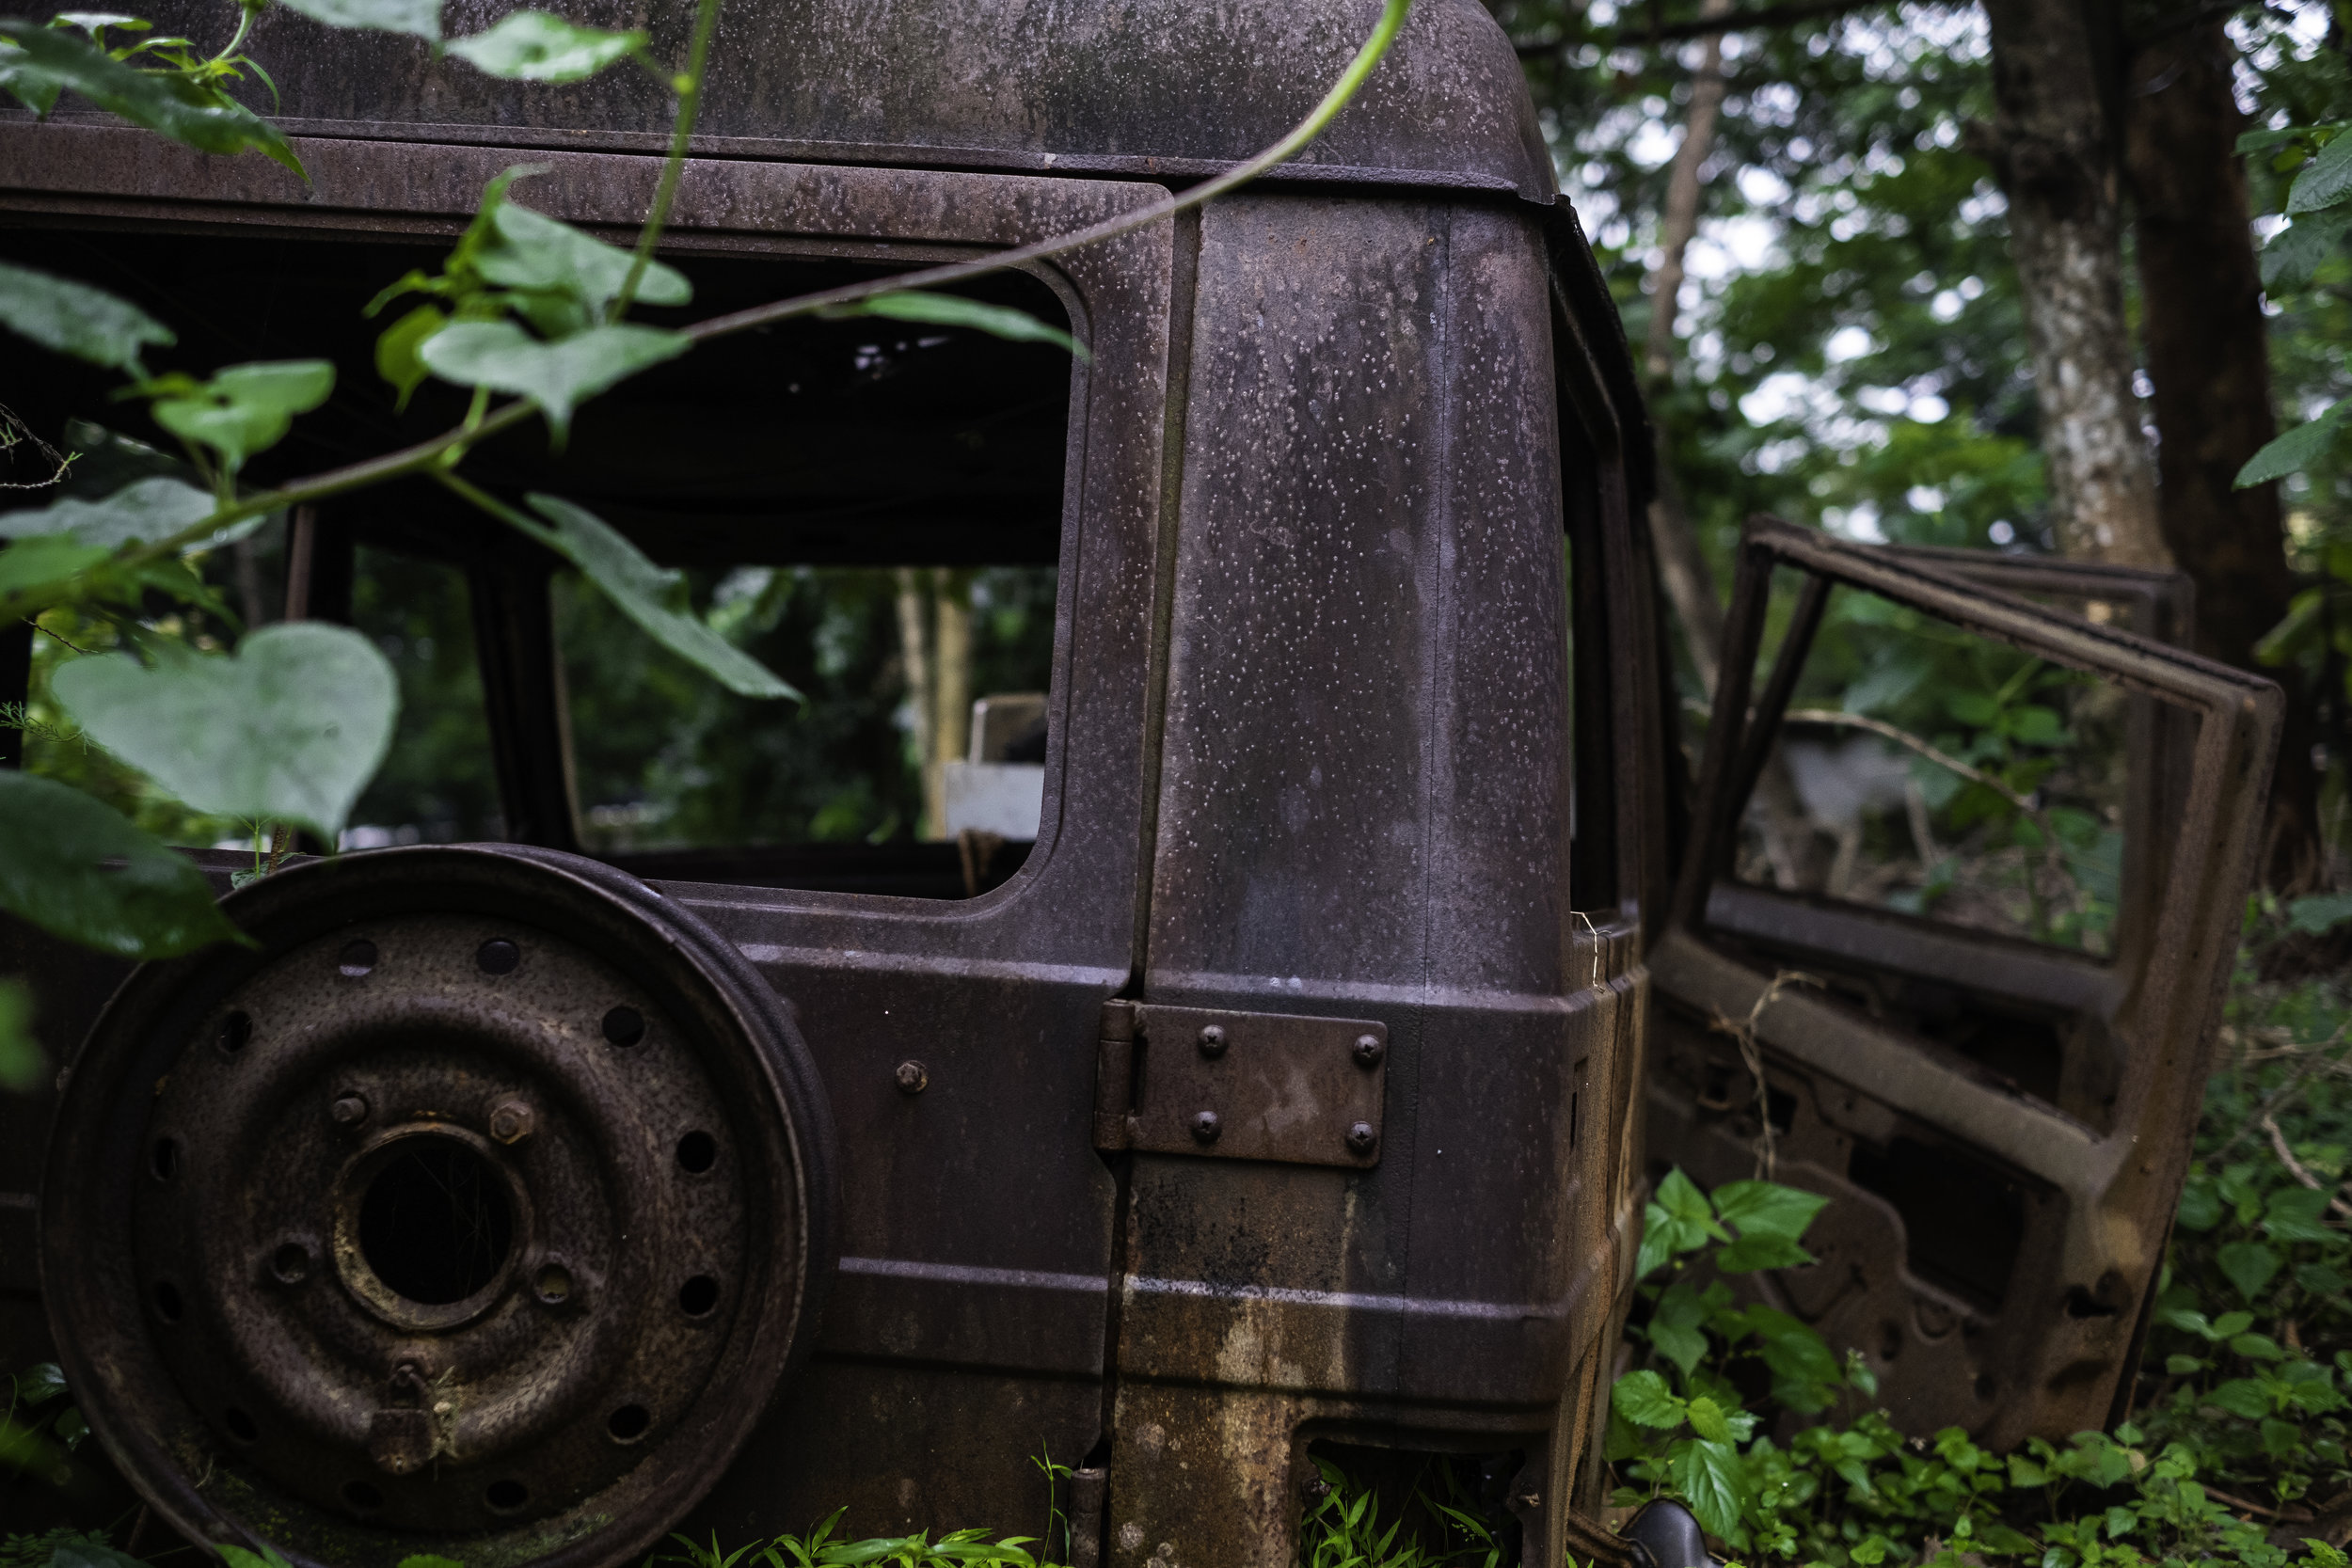   A destroyed jeep still sits where it was last parked in the courtyard of a Catholic compound in Kandhamal, India. During the Summer of 2008, and violent mob of Hindu nationalists forcibly entered the property where they proceeded to rape the nuns a